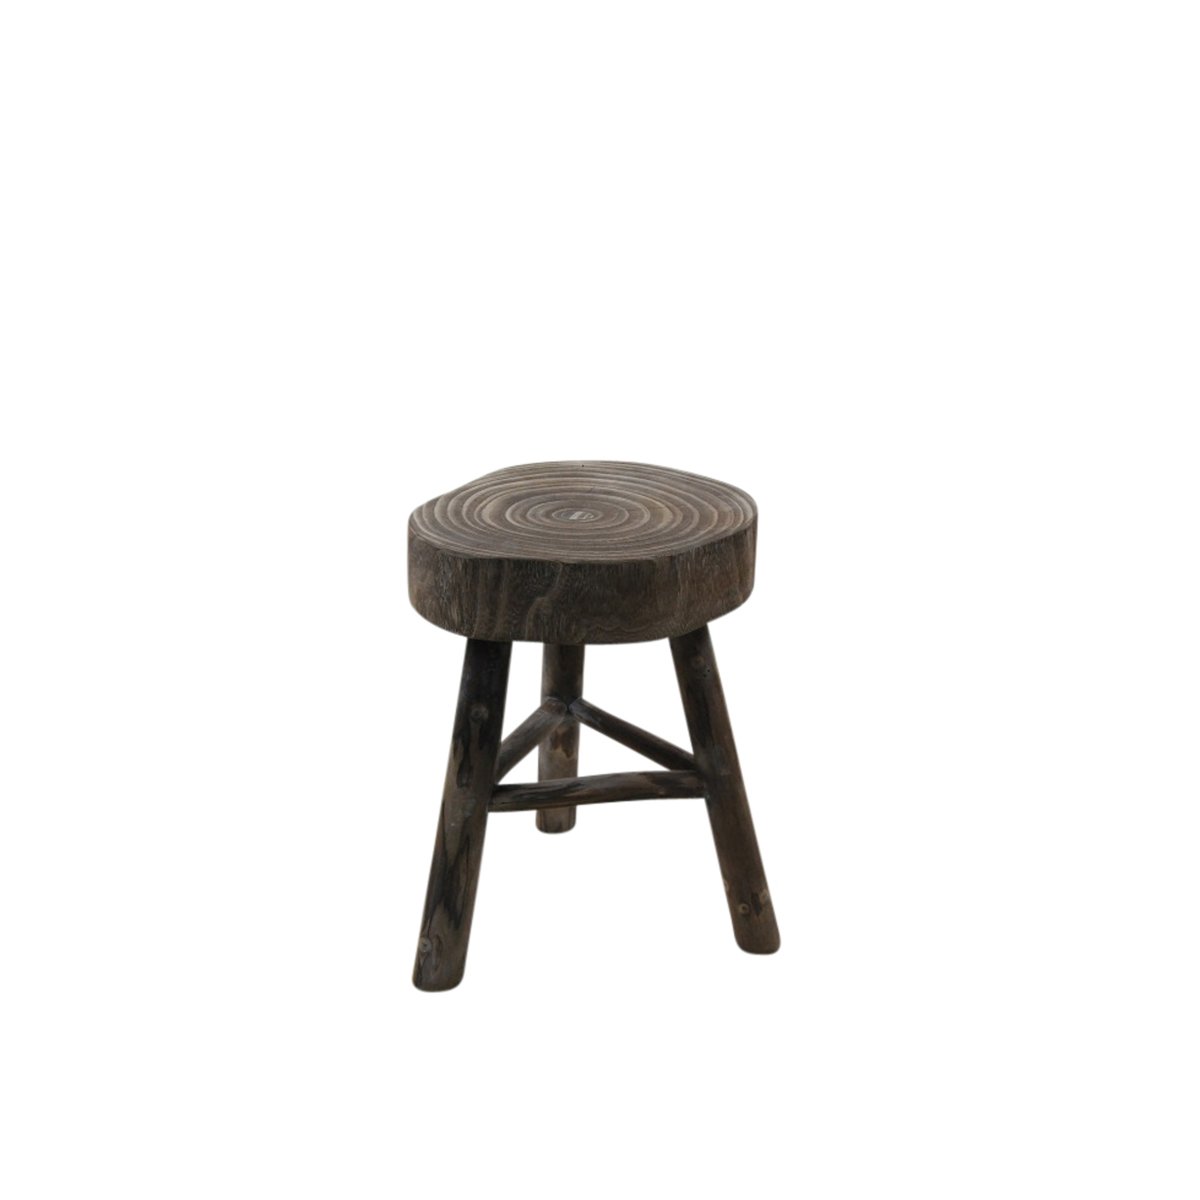 14339-04 15.75 In. Wooden Stool, Gray